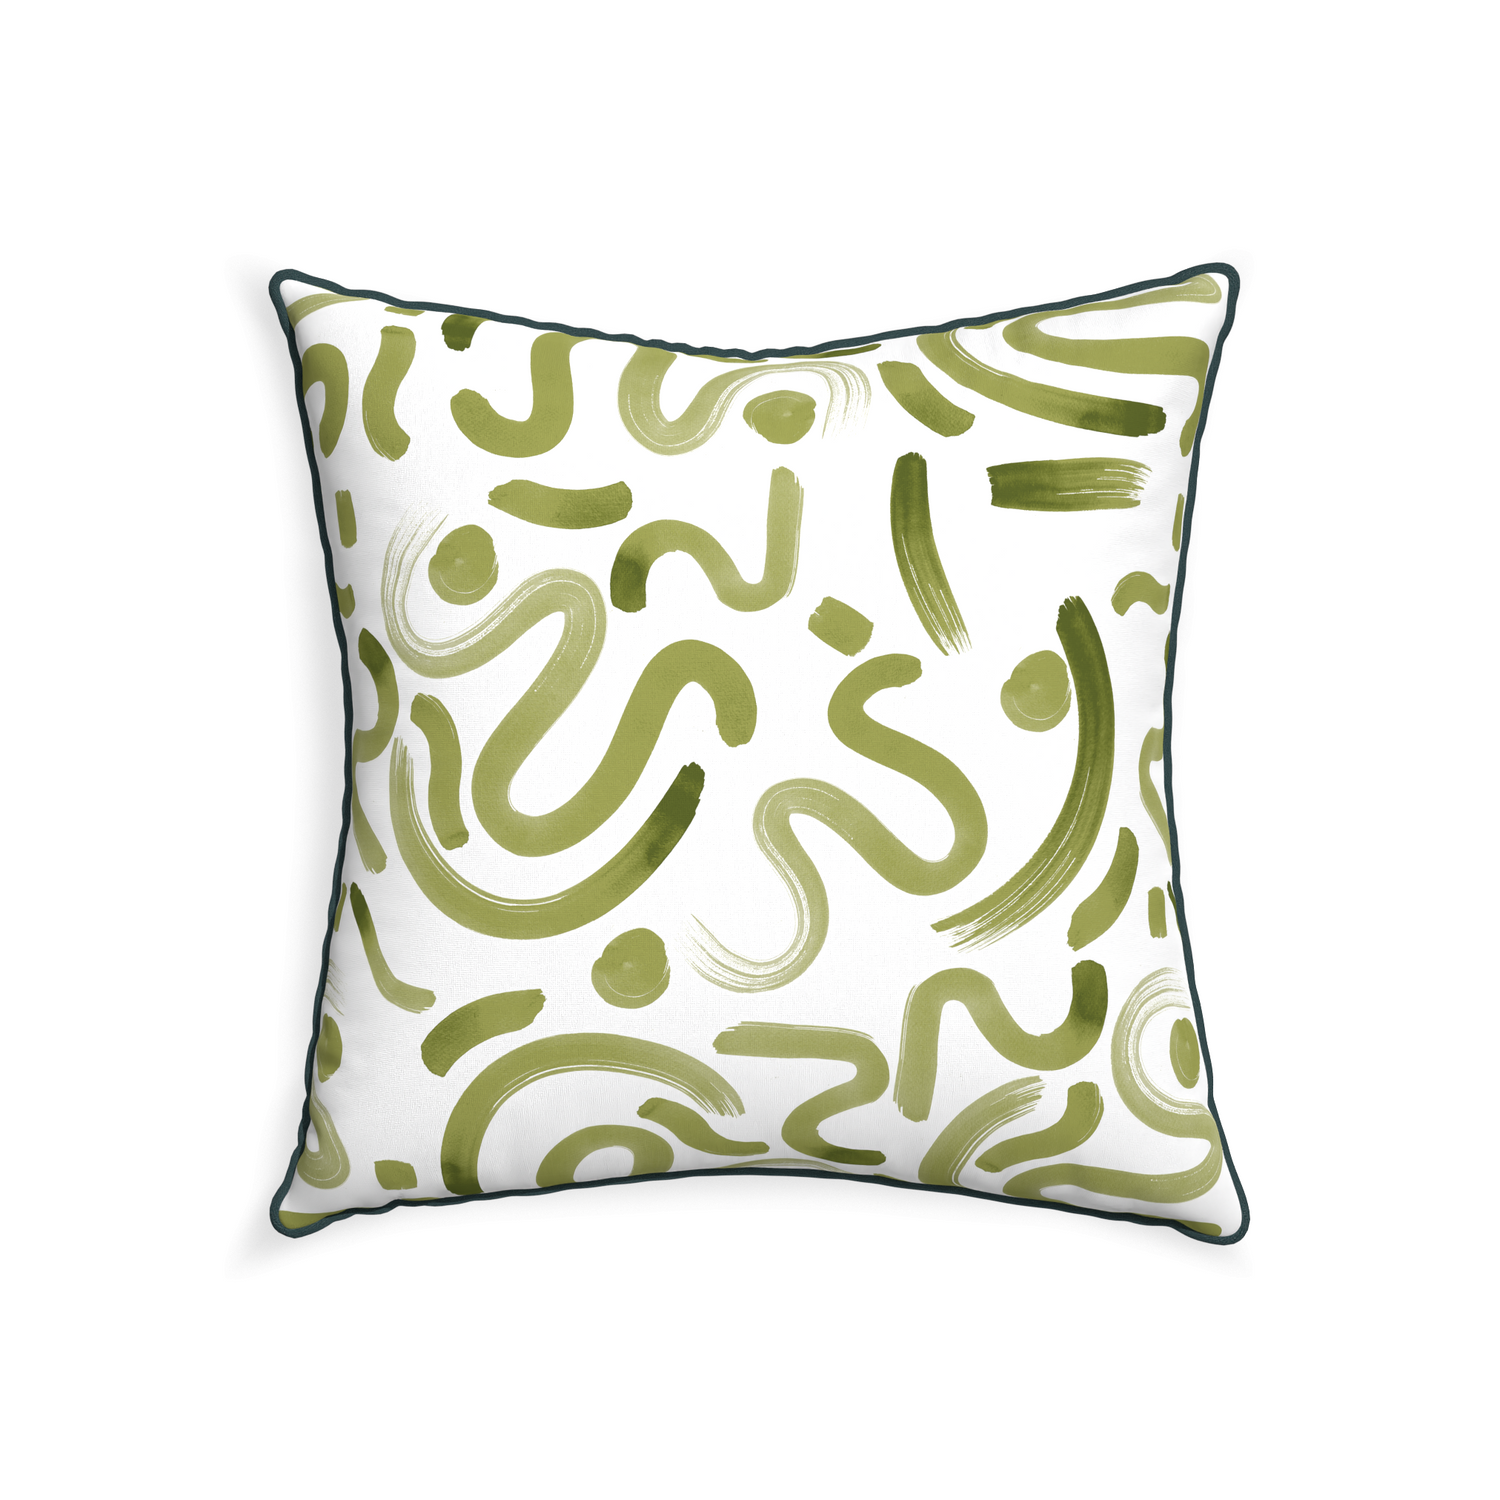 22-square hockney moss custom moss greenpillow with p piping on white background